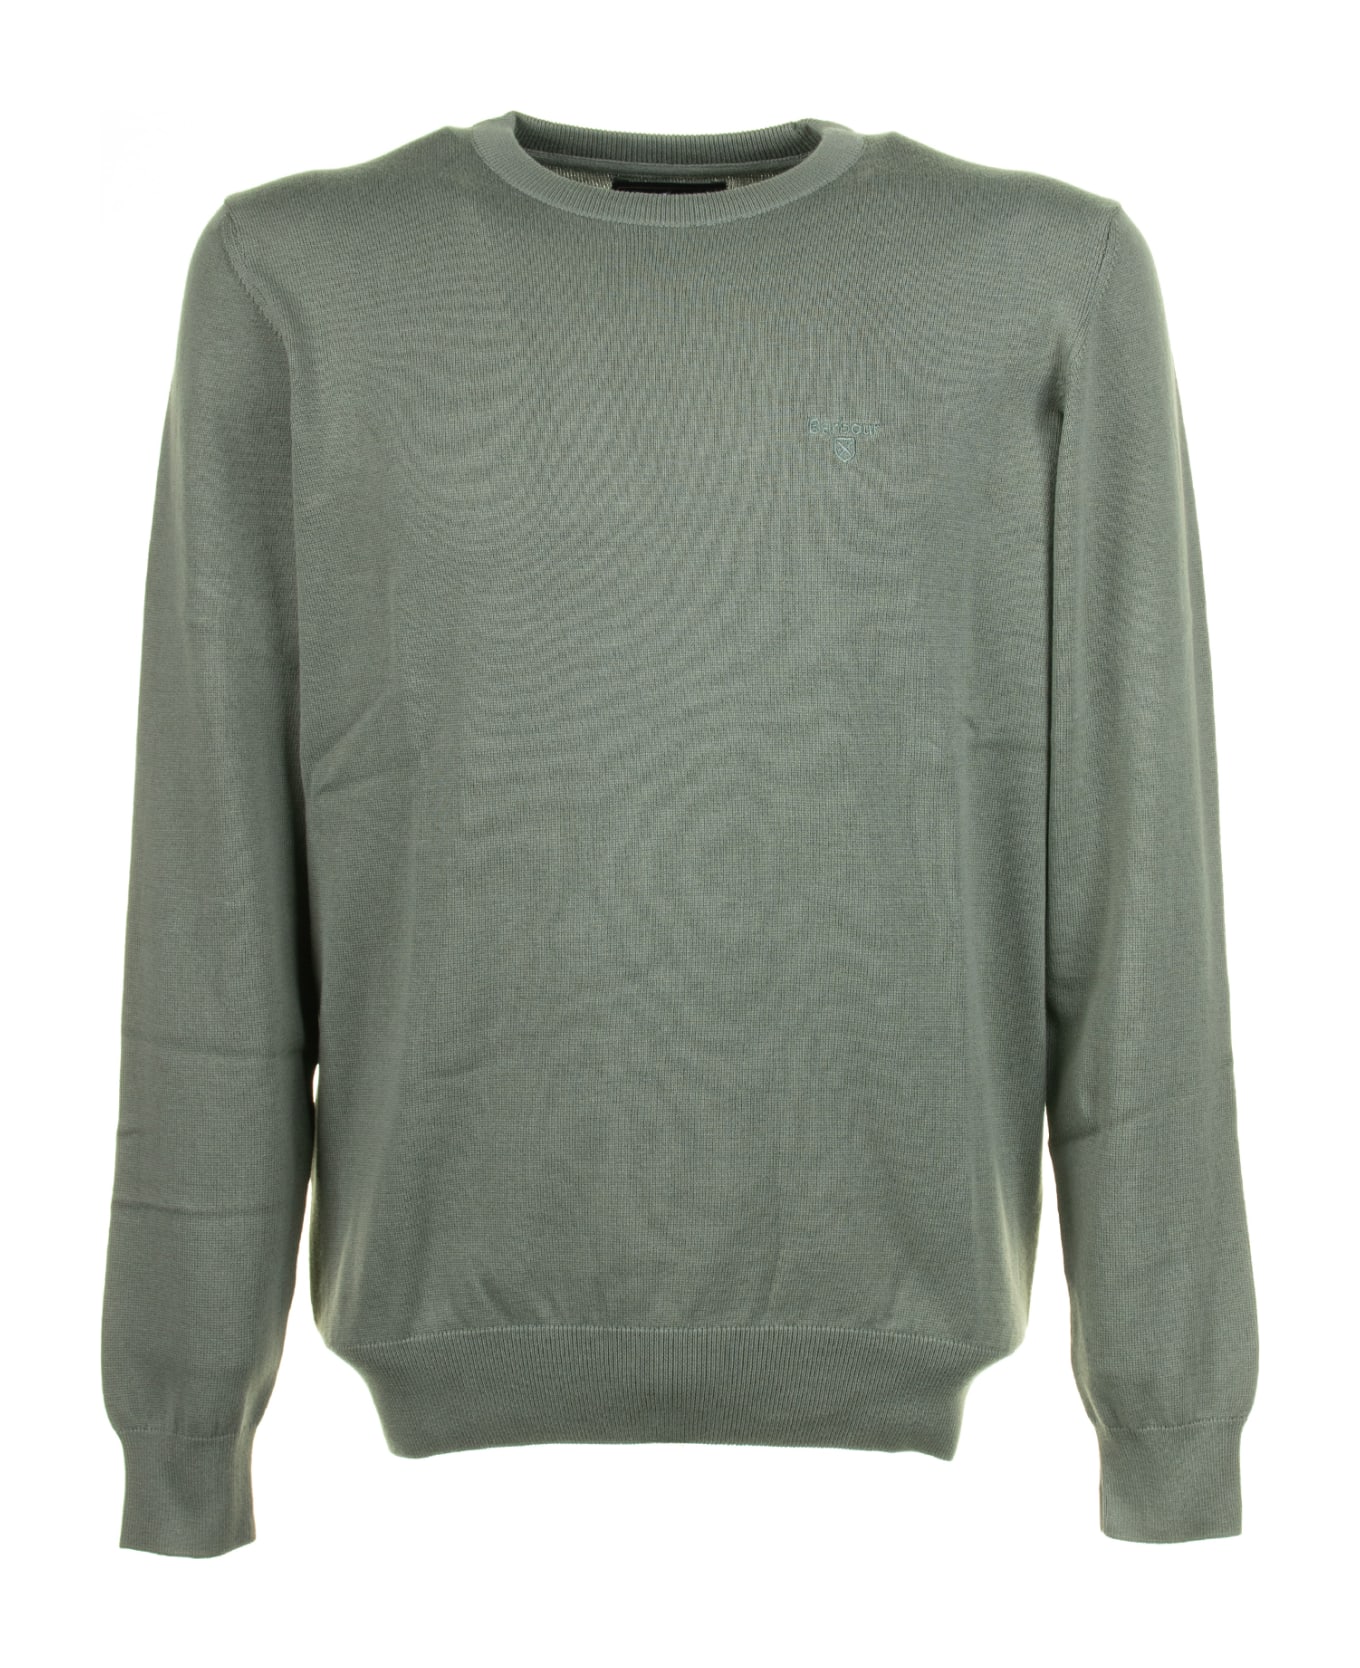 Barbour Green Crew Neck Sweater - AGAVE GREEN